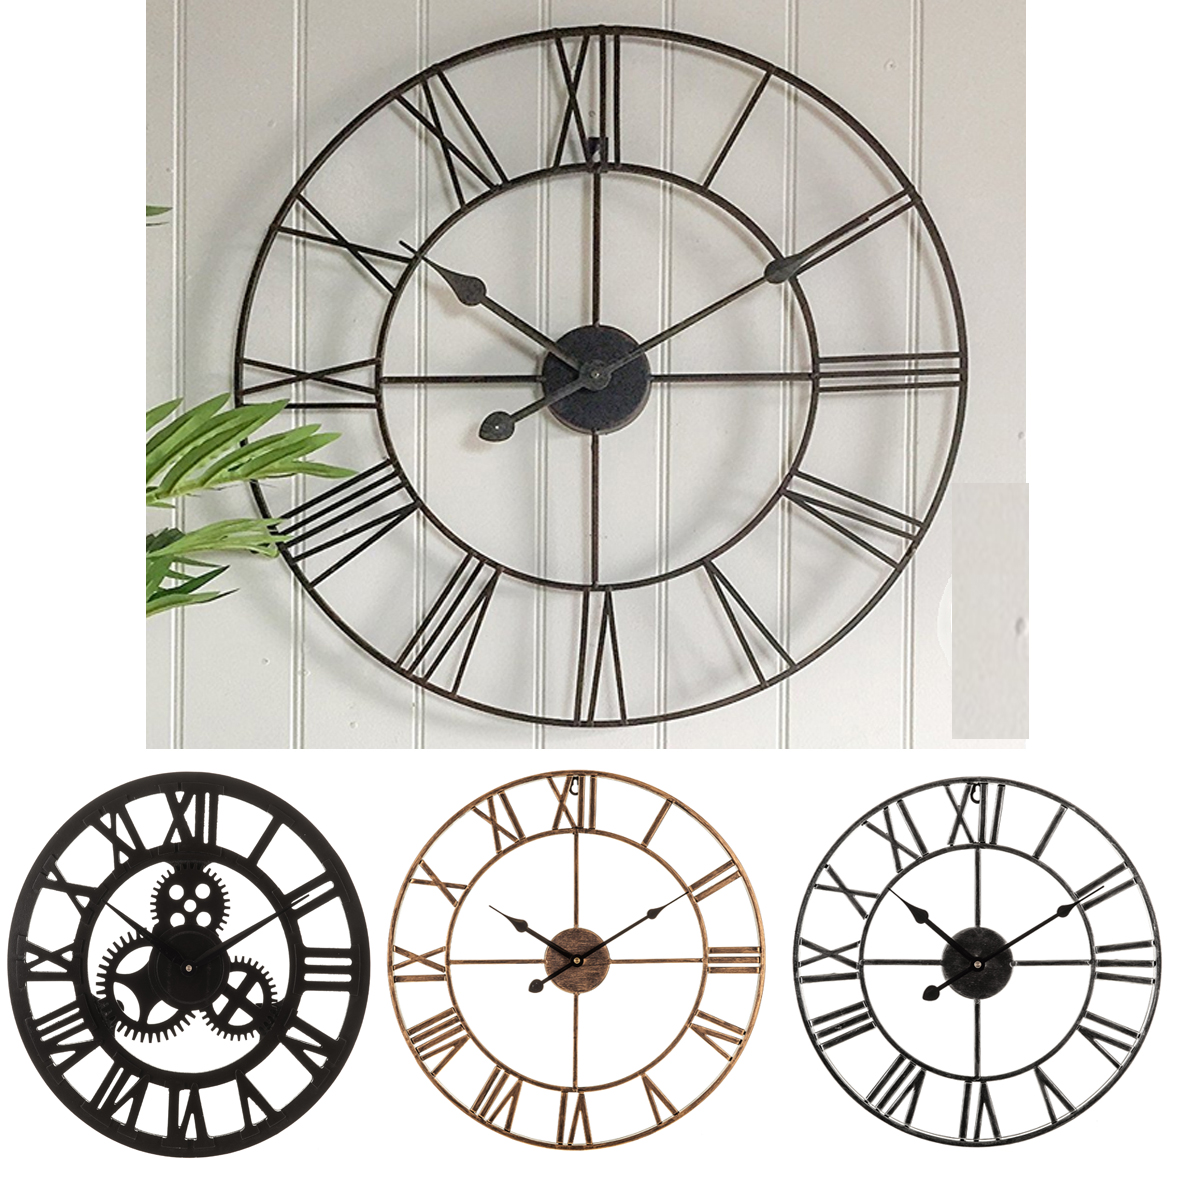 60CM EXTRA LARGE ROMAN NUMERALS SKELETON WALL CLOCK BIG GIANT OPEN FACE ...